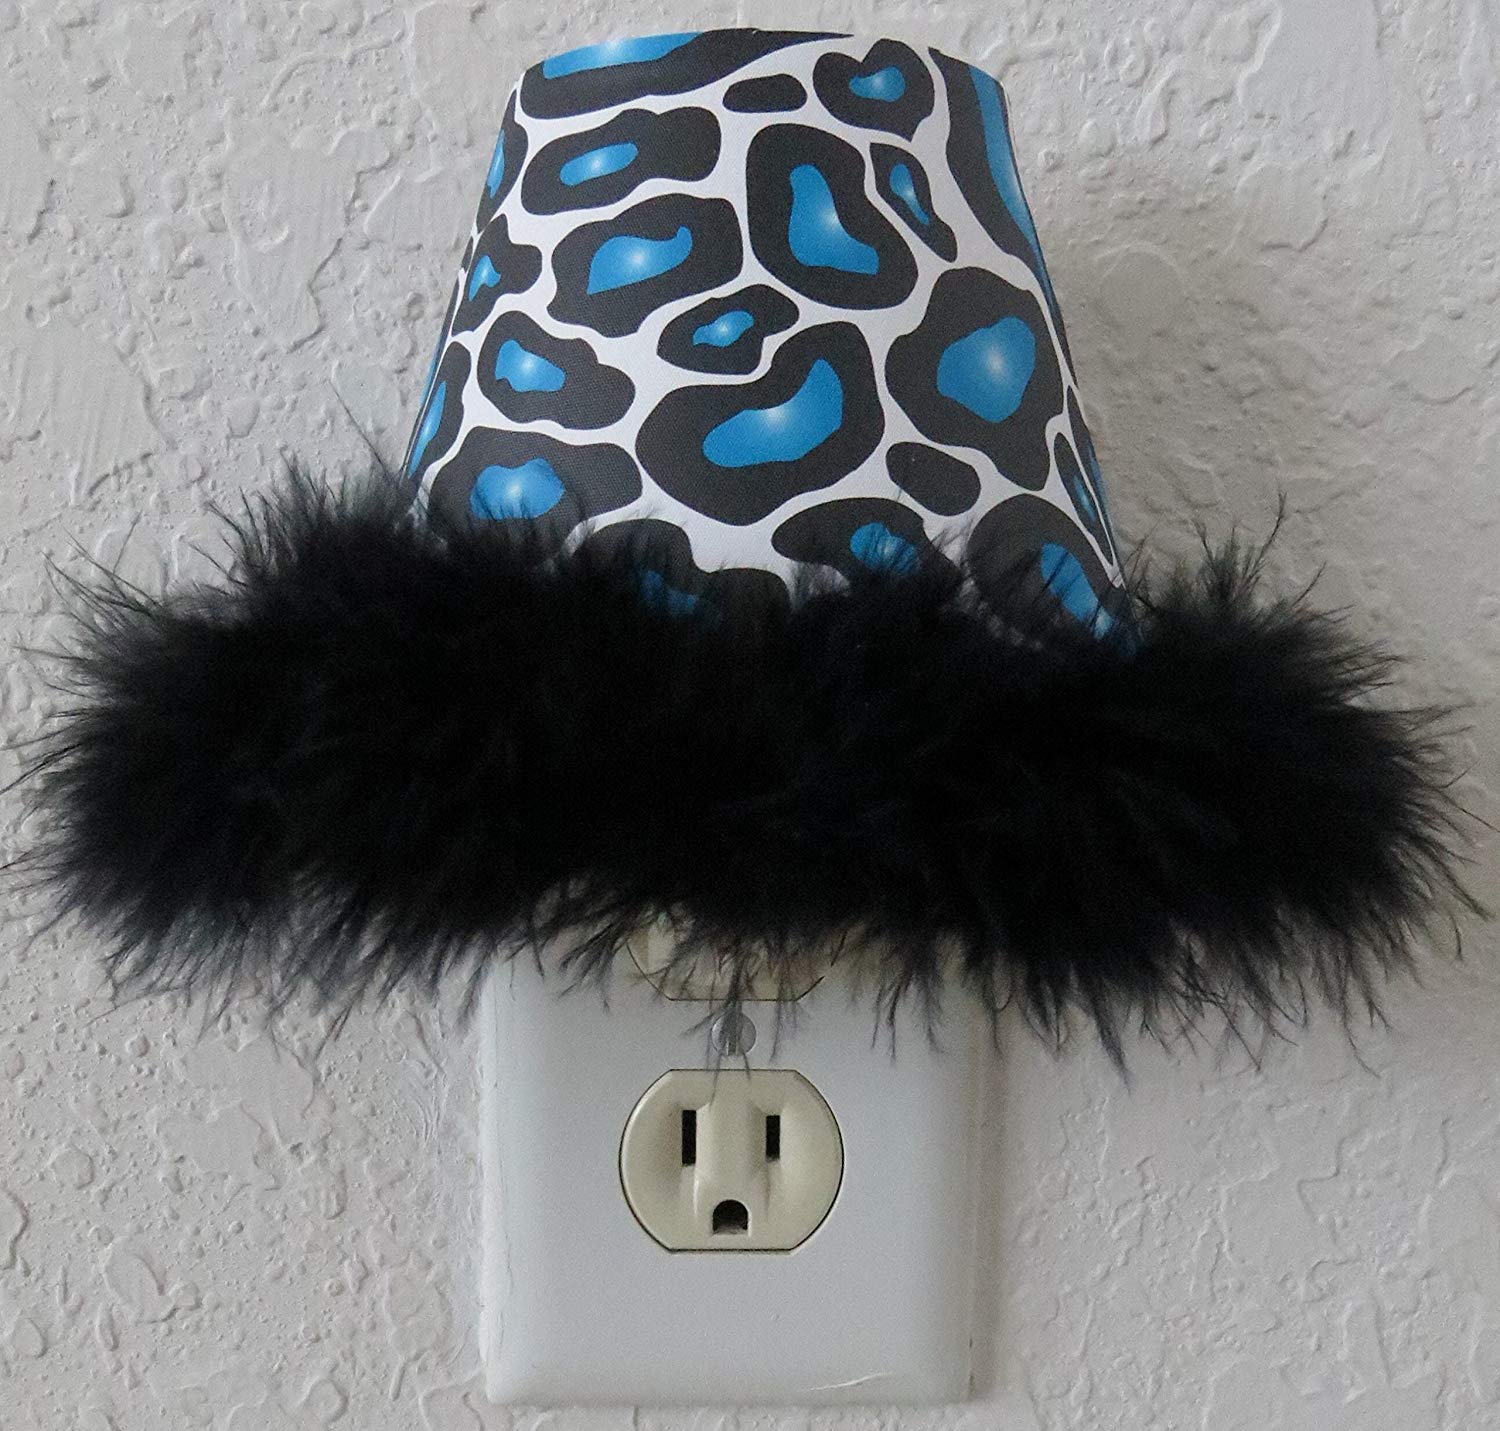 Blue Leopard Print Night Light with Black Feathered Boa in Turquois and Black